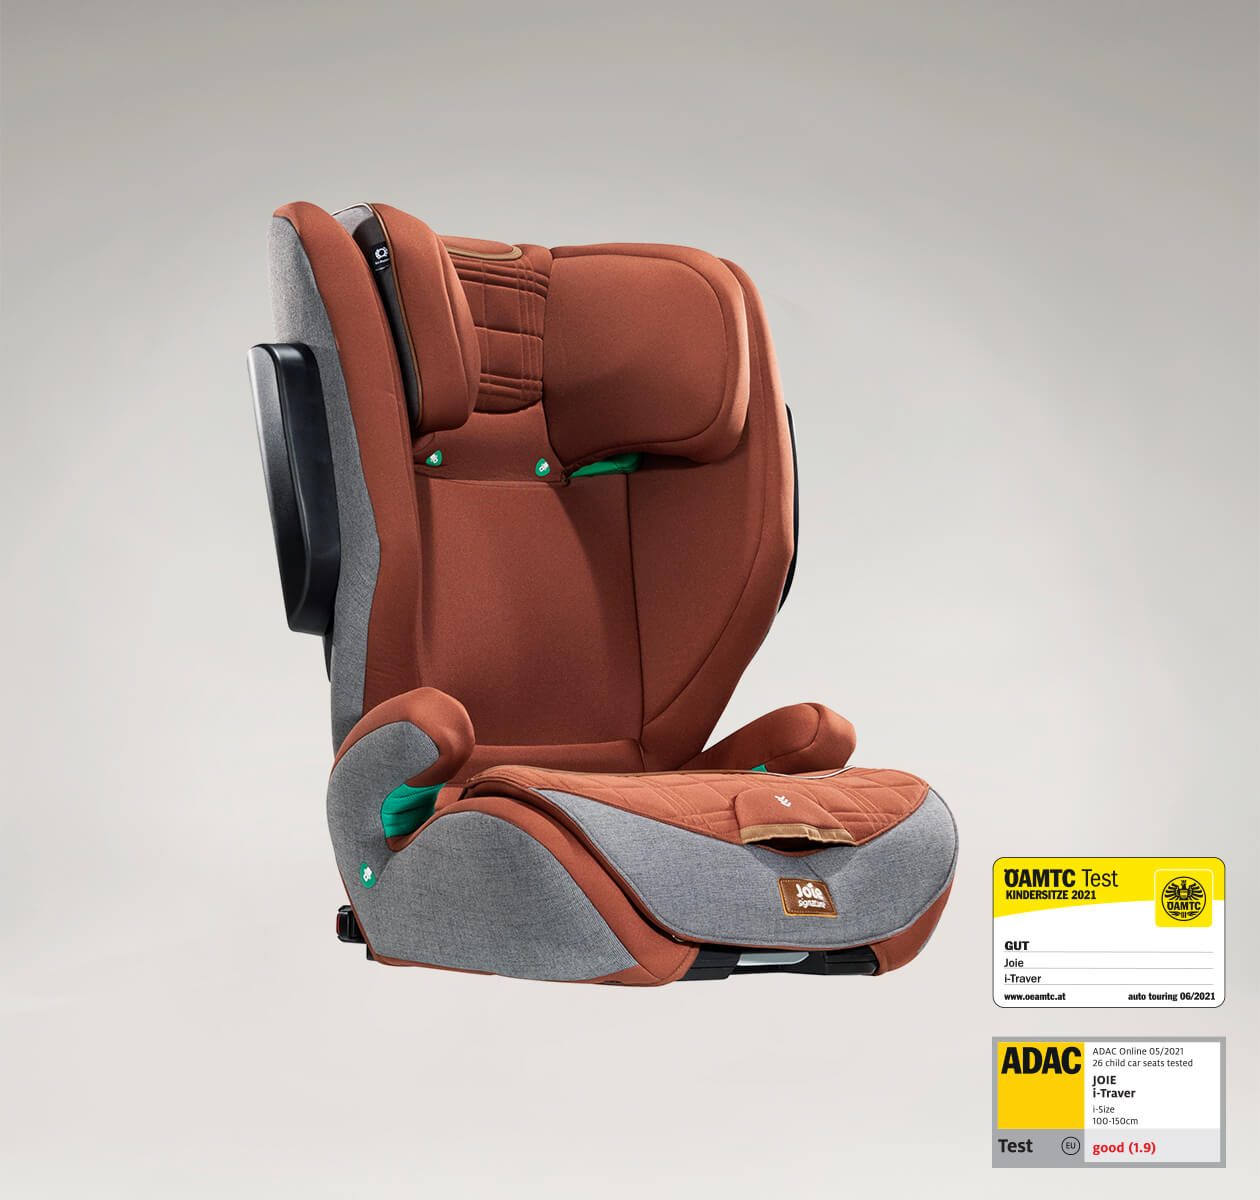 Joie i-Traver booster seat in dark blue at an angle, with the ADAC test label in the lower right corner.